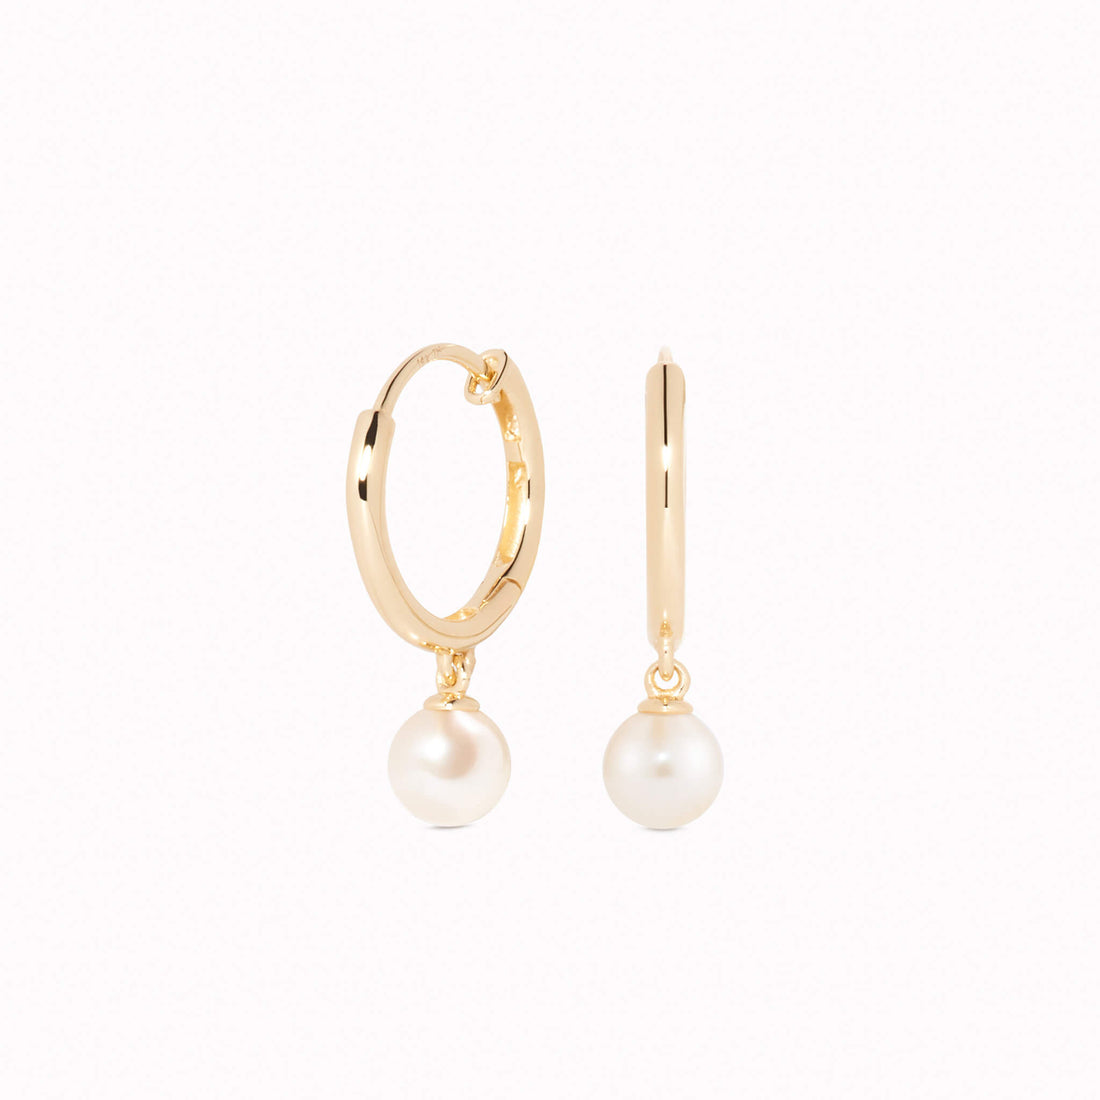 14k Gold Huggie Earrings with Pearl - Alicia